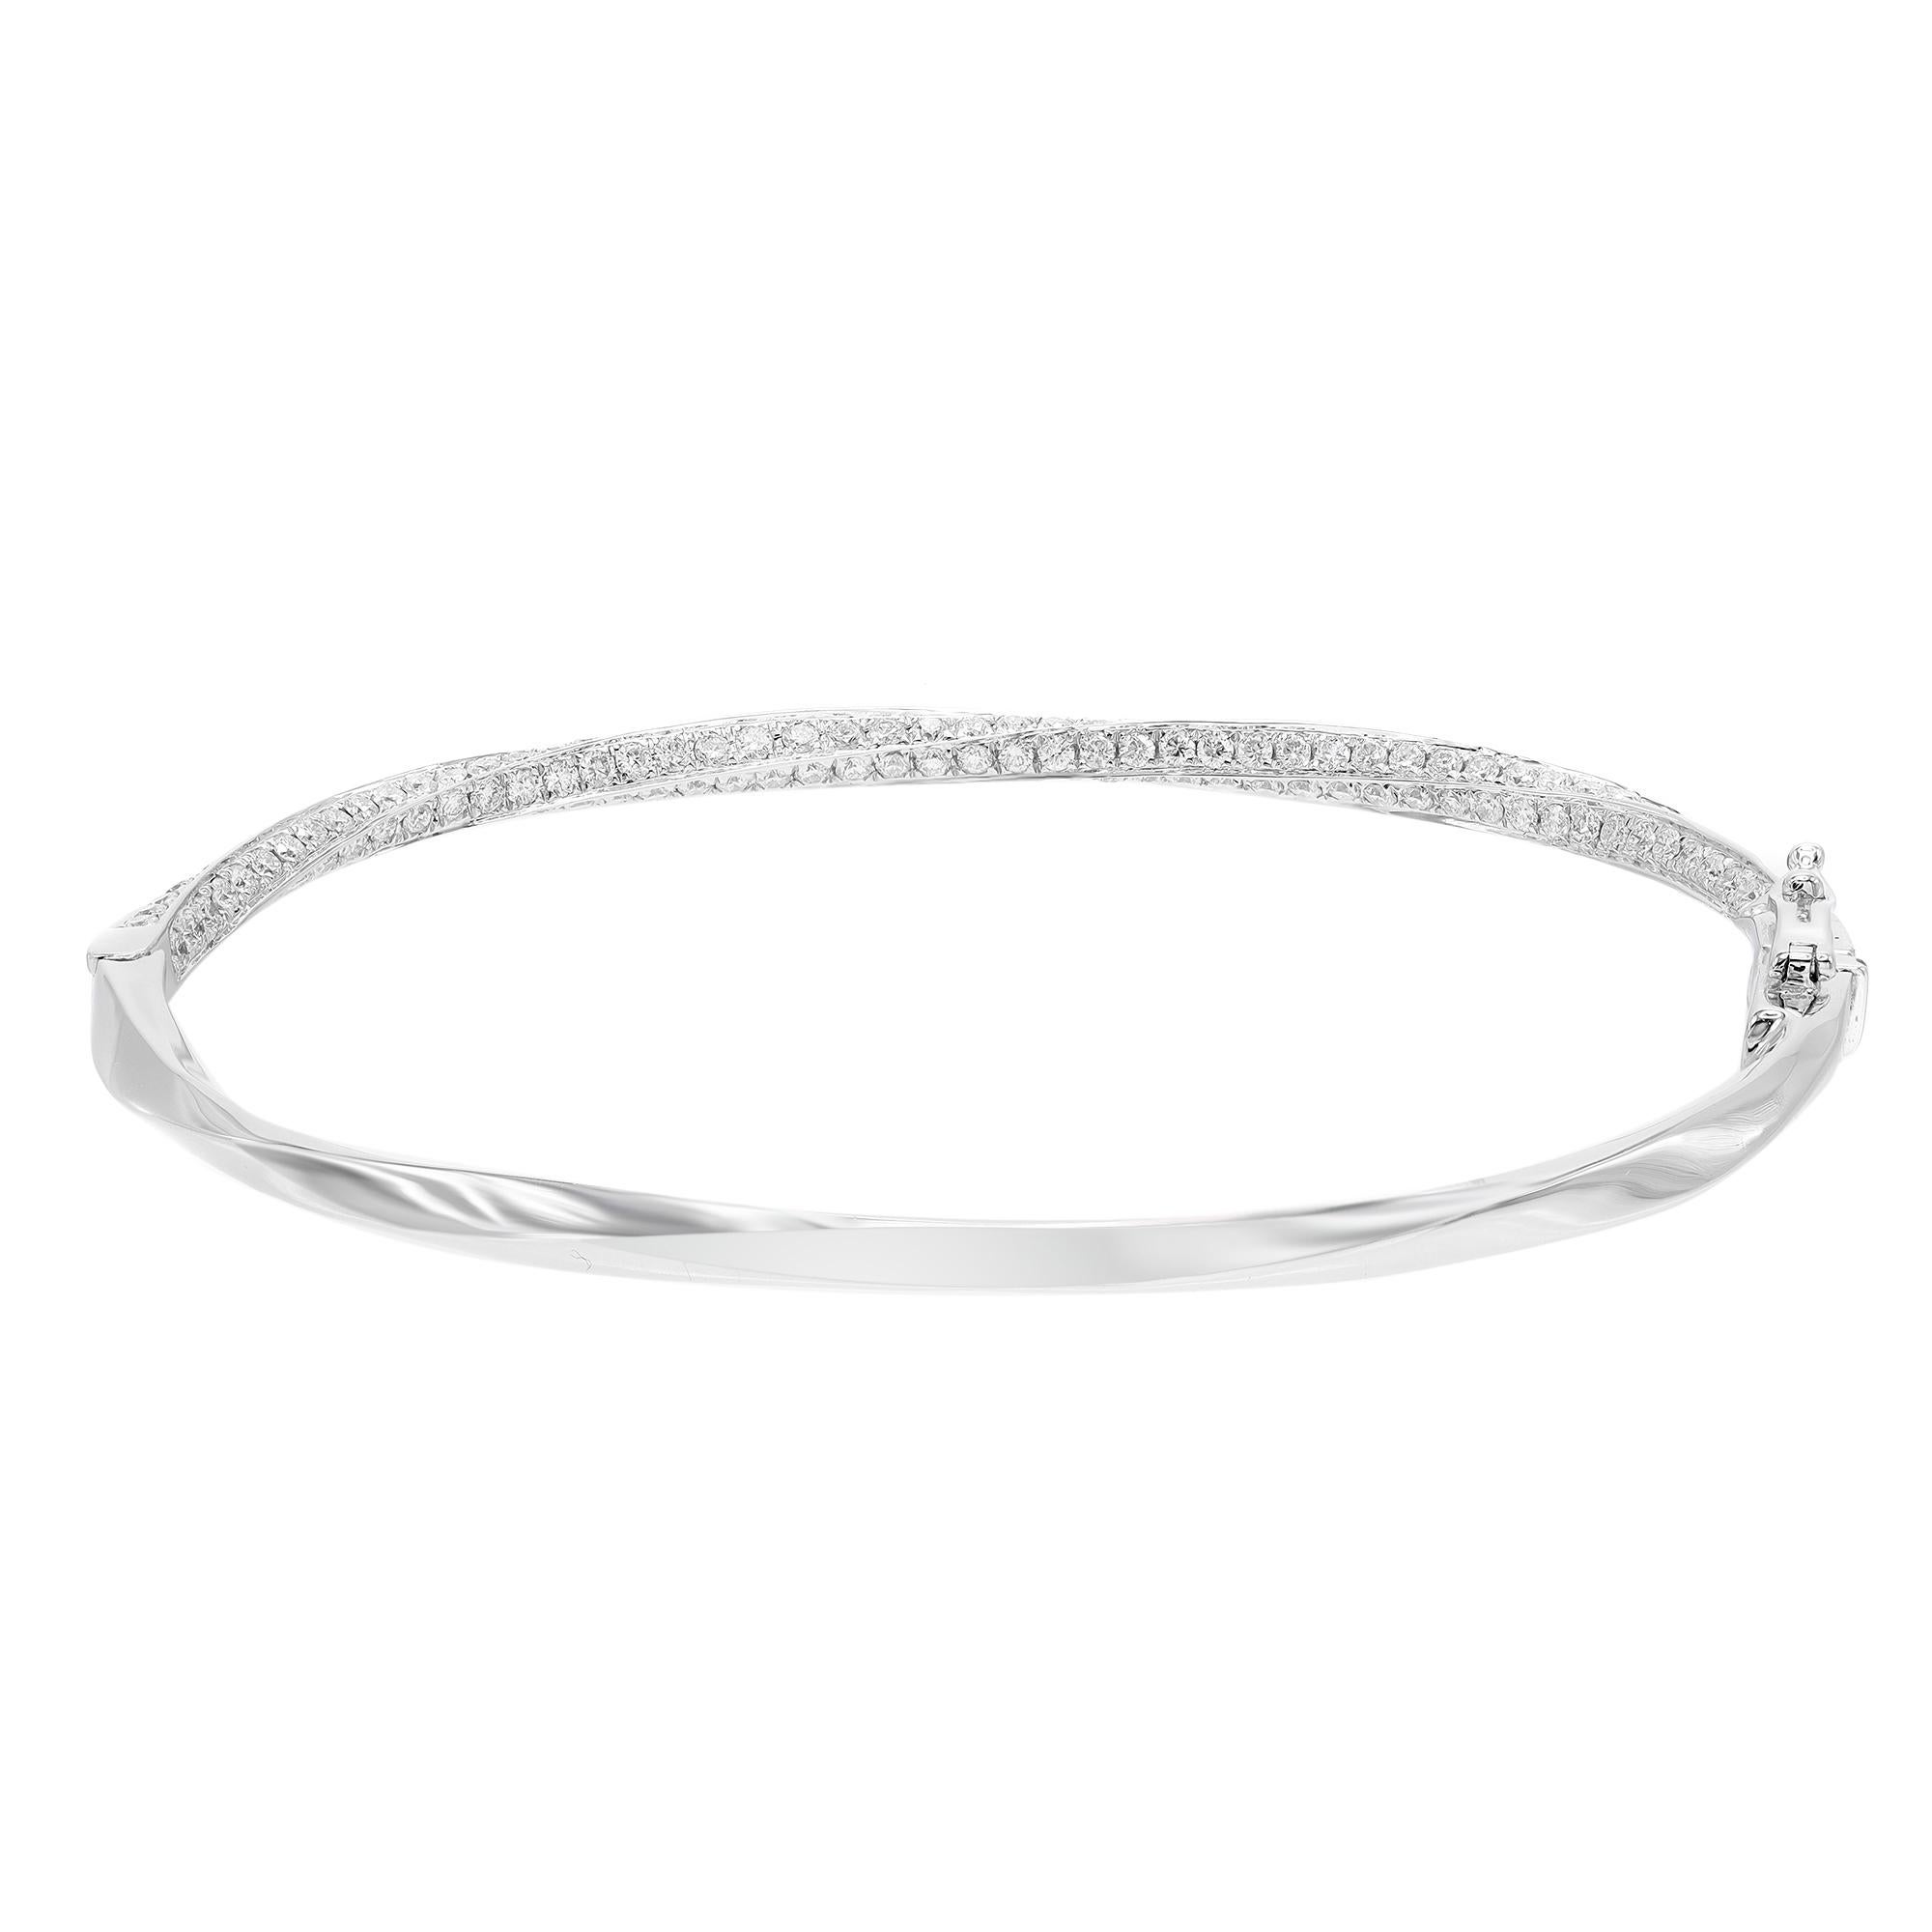 This beautifully crafted bangle bracelet features pave set round brilliant cut diamonds encrusted halfway through the bangle. Crafted in 18k white gold. Total diamond weight: 2.09 carats. Diamond Quality: F-G color and SI clarity. Wrist size: 6.5